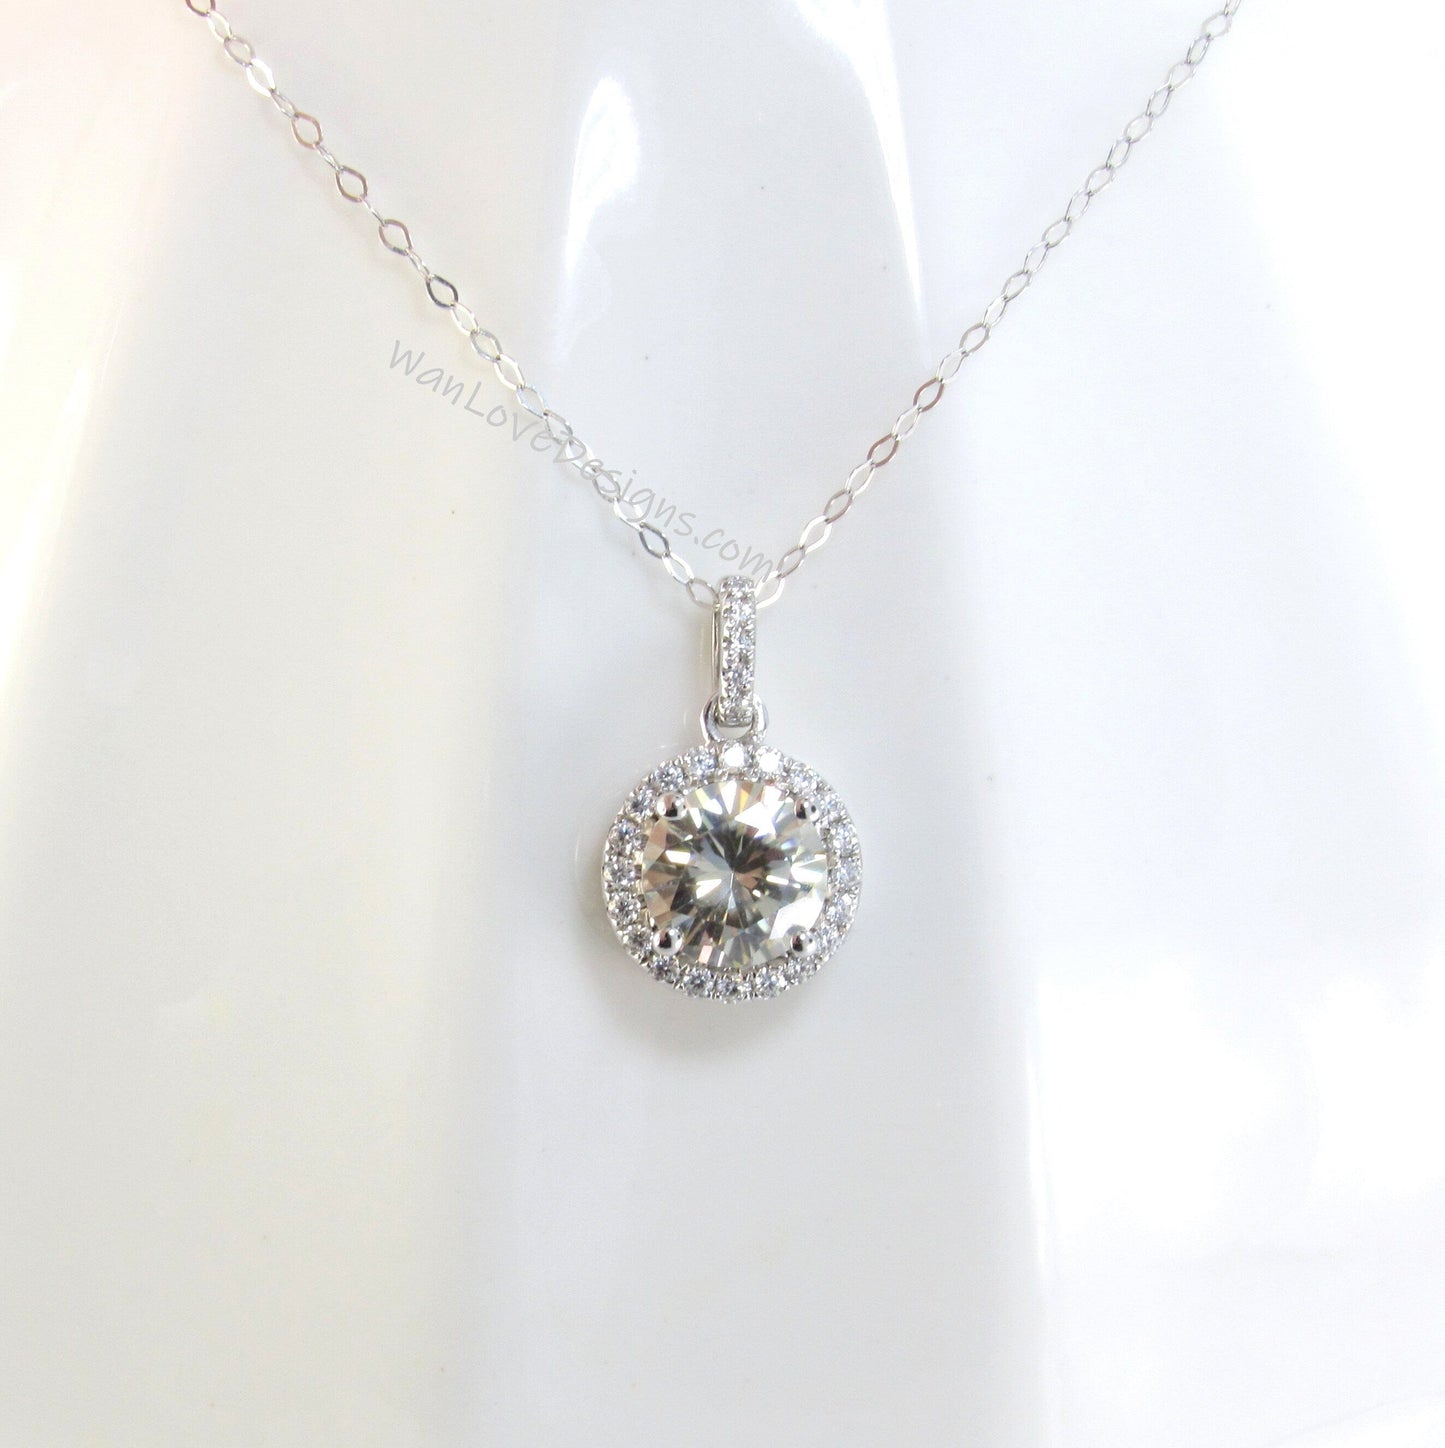 Champagne Moissanite Halo Necklace, Round cut Halo Necklace, White Gold Moissanite Halo Charm, Birthday Gift, Gift For Her, Ready-To-Ship Wan Love Designs